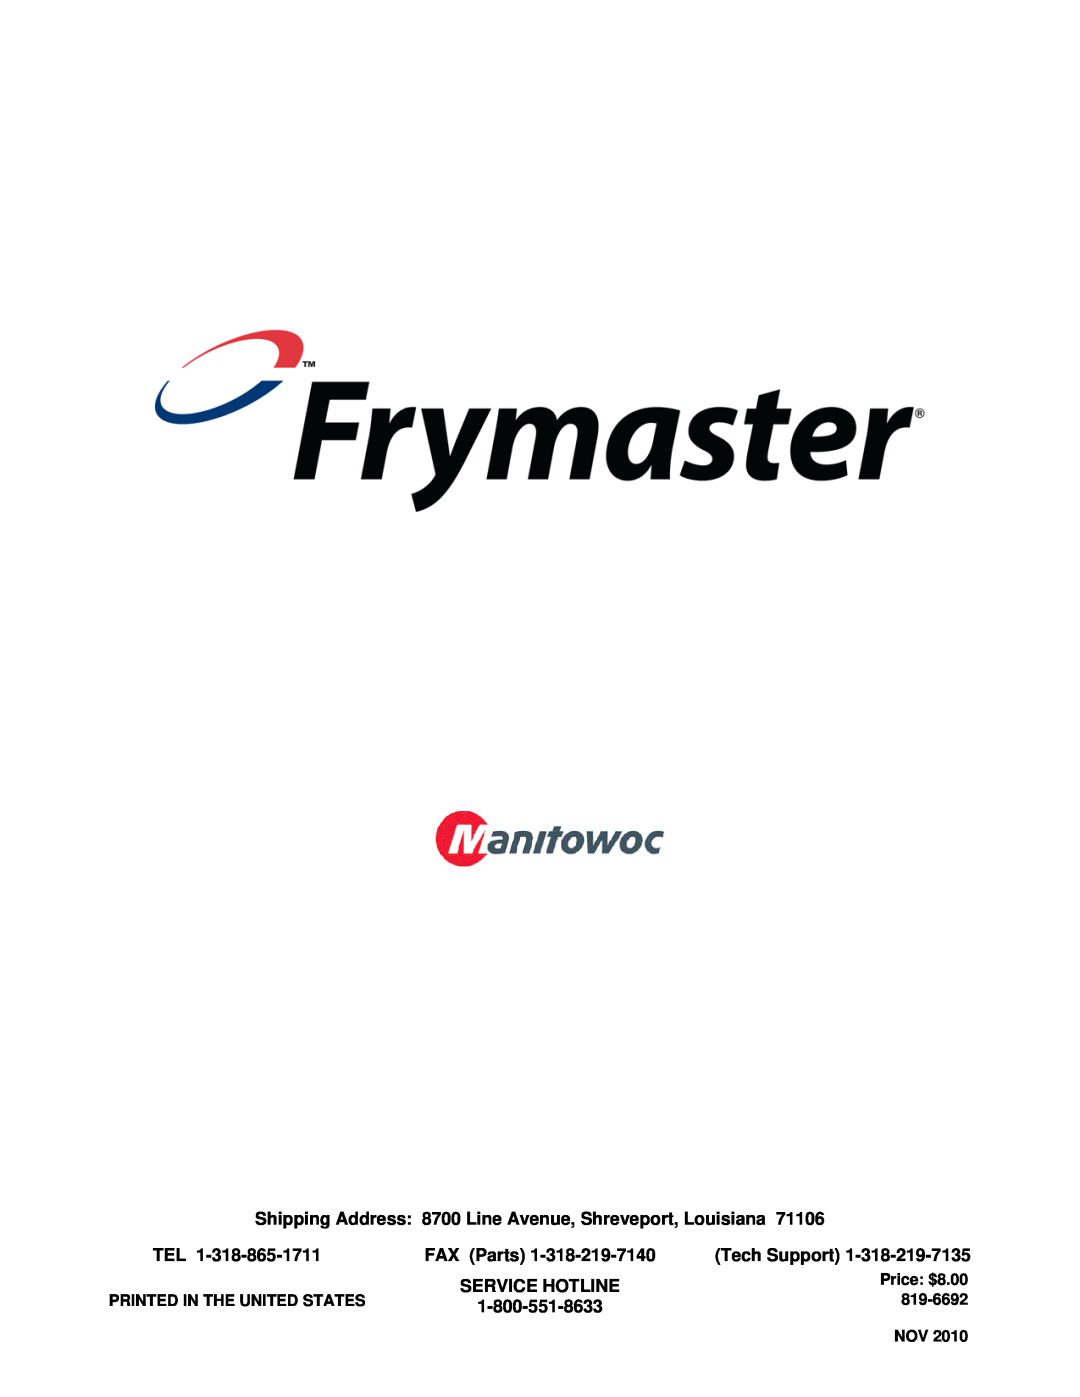 Frymaster 8196692 manual FAX Parts, Tech Support, Service Hotline, Price $8.00, 819-6692 